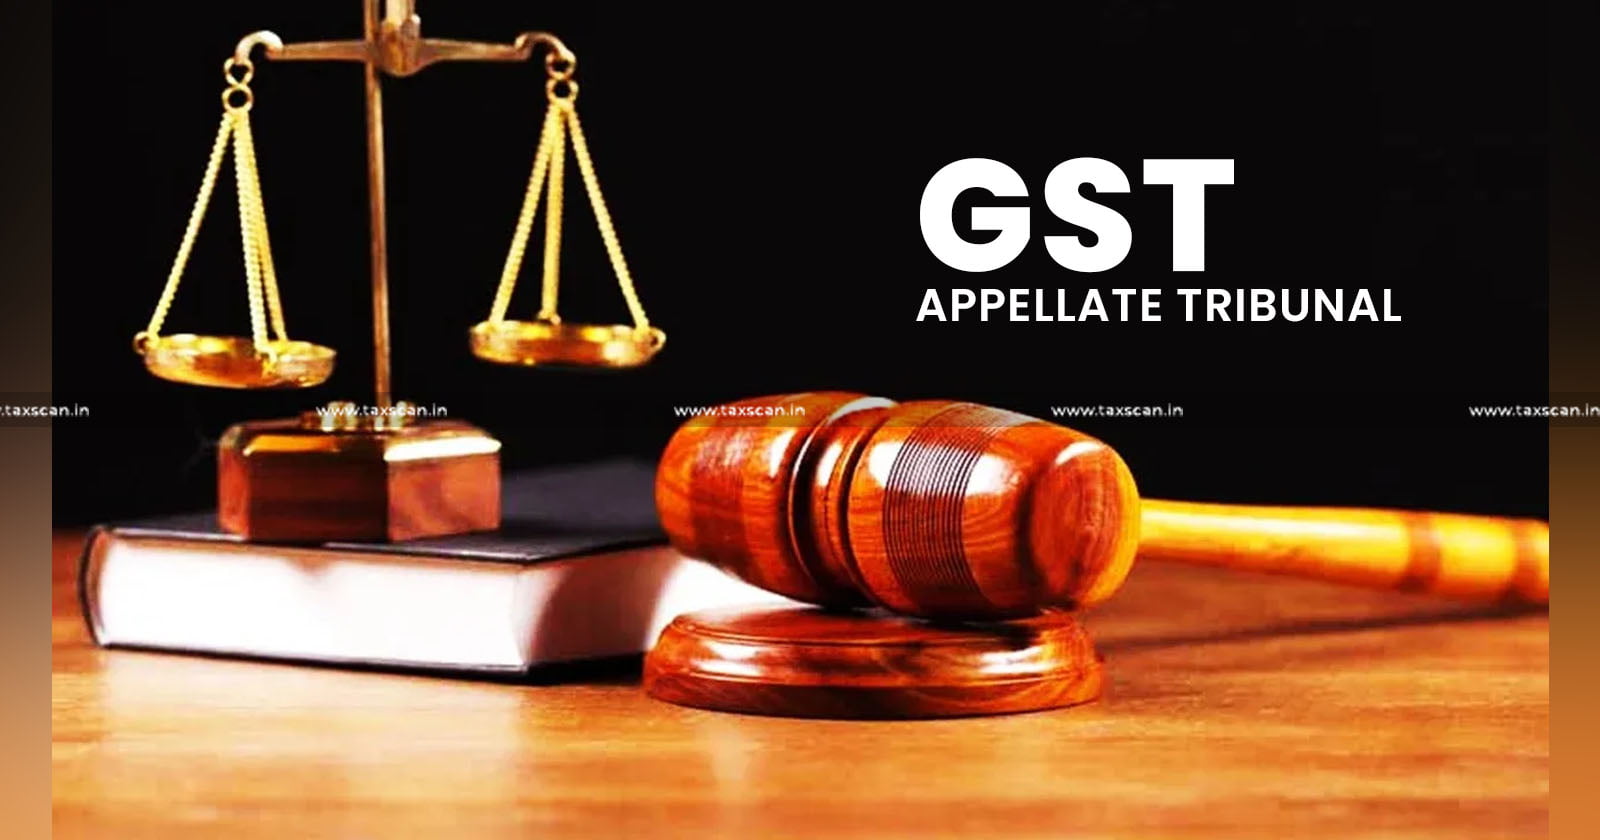 Absence of GST Appellate Tribunal to Pay Tax and Penalty: Orissa HC Orders to Stay Demand During Pendency of Writ Petition